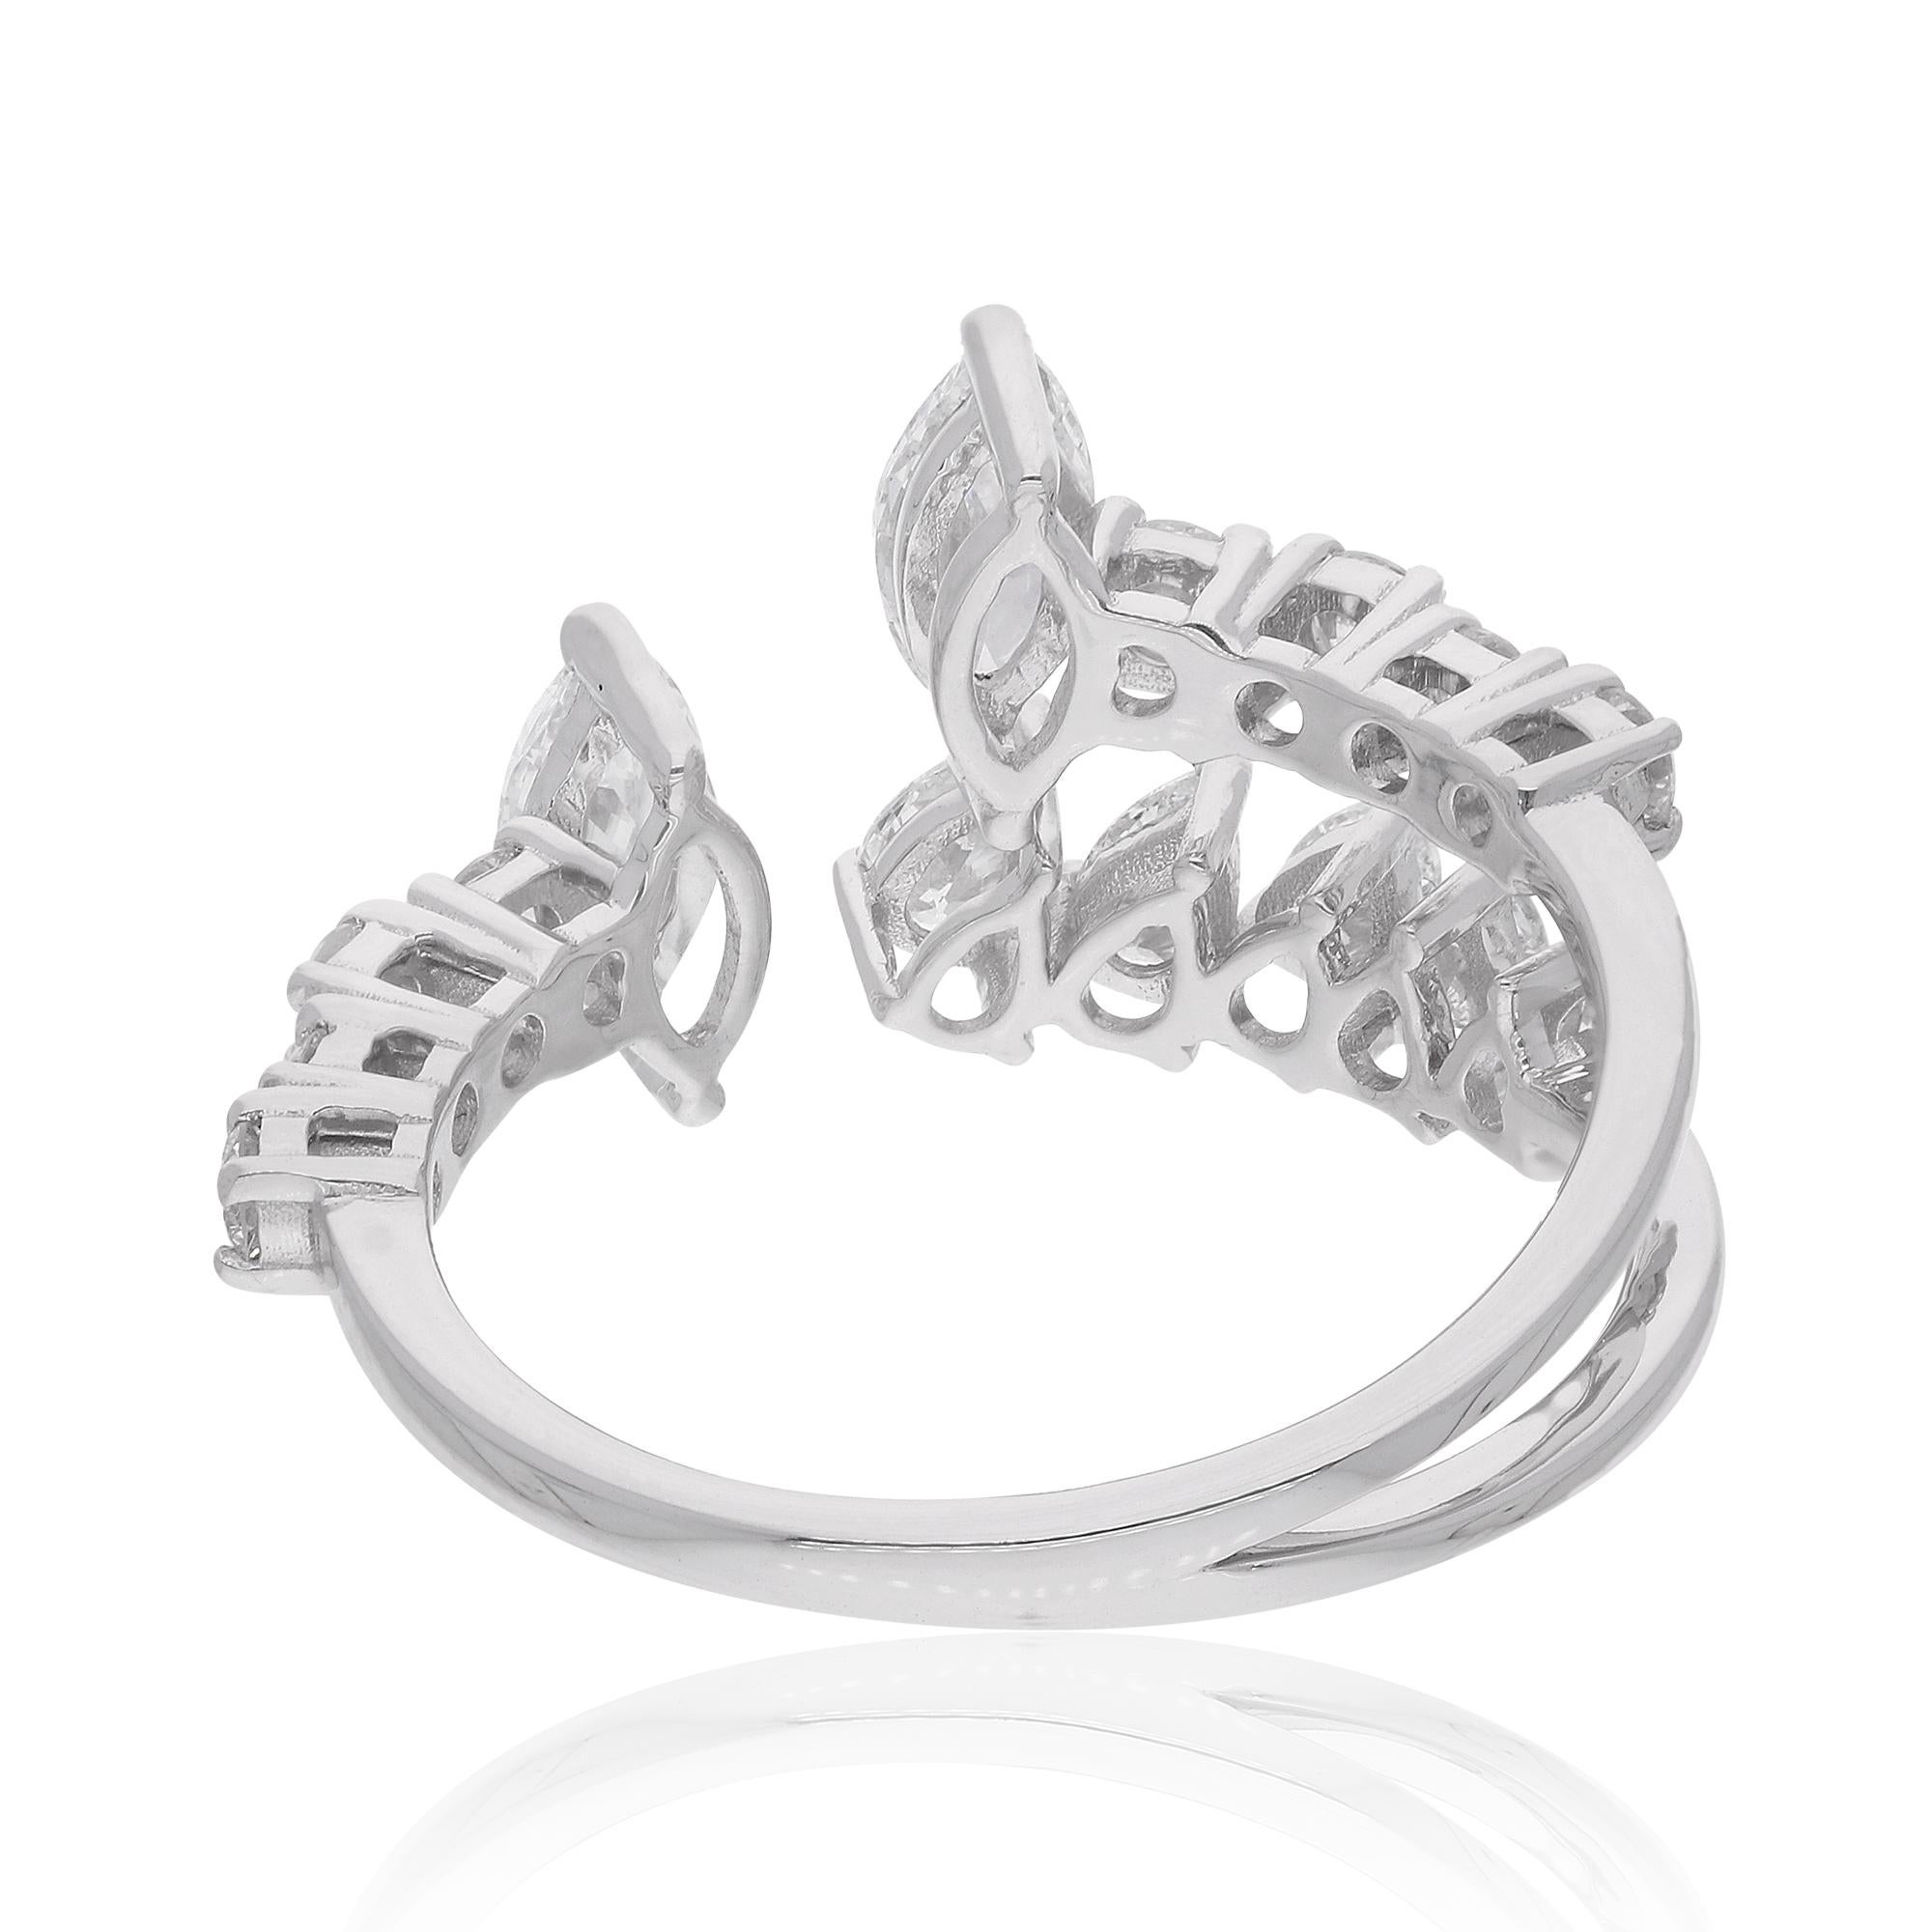 A handmade cuff ring featuring a 1.35 carat pear and marquise diamonds in 18 karat white gold is a stunning and unique piece of fine jewelry. The ring typically showcases a combination of a pear-shaped diamond and marquise-shaped diamonds.

Item